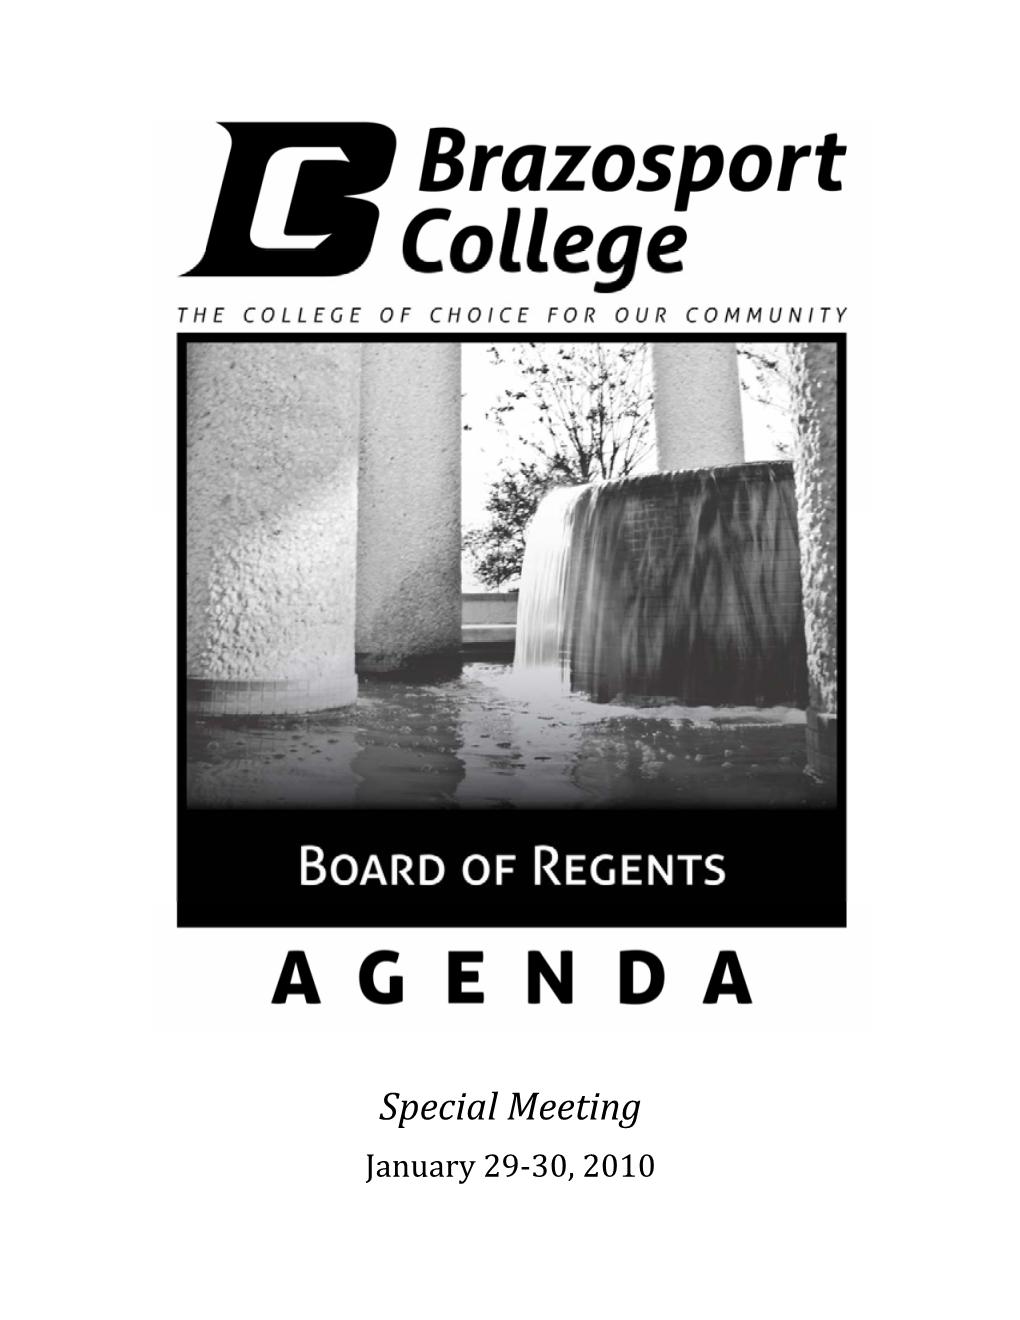 Special Meeting in Room 103A in the Corporate Learning Center, Lake Jackson, Texas